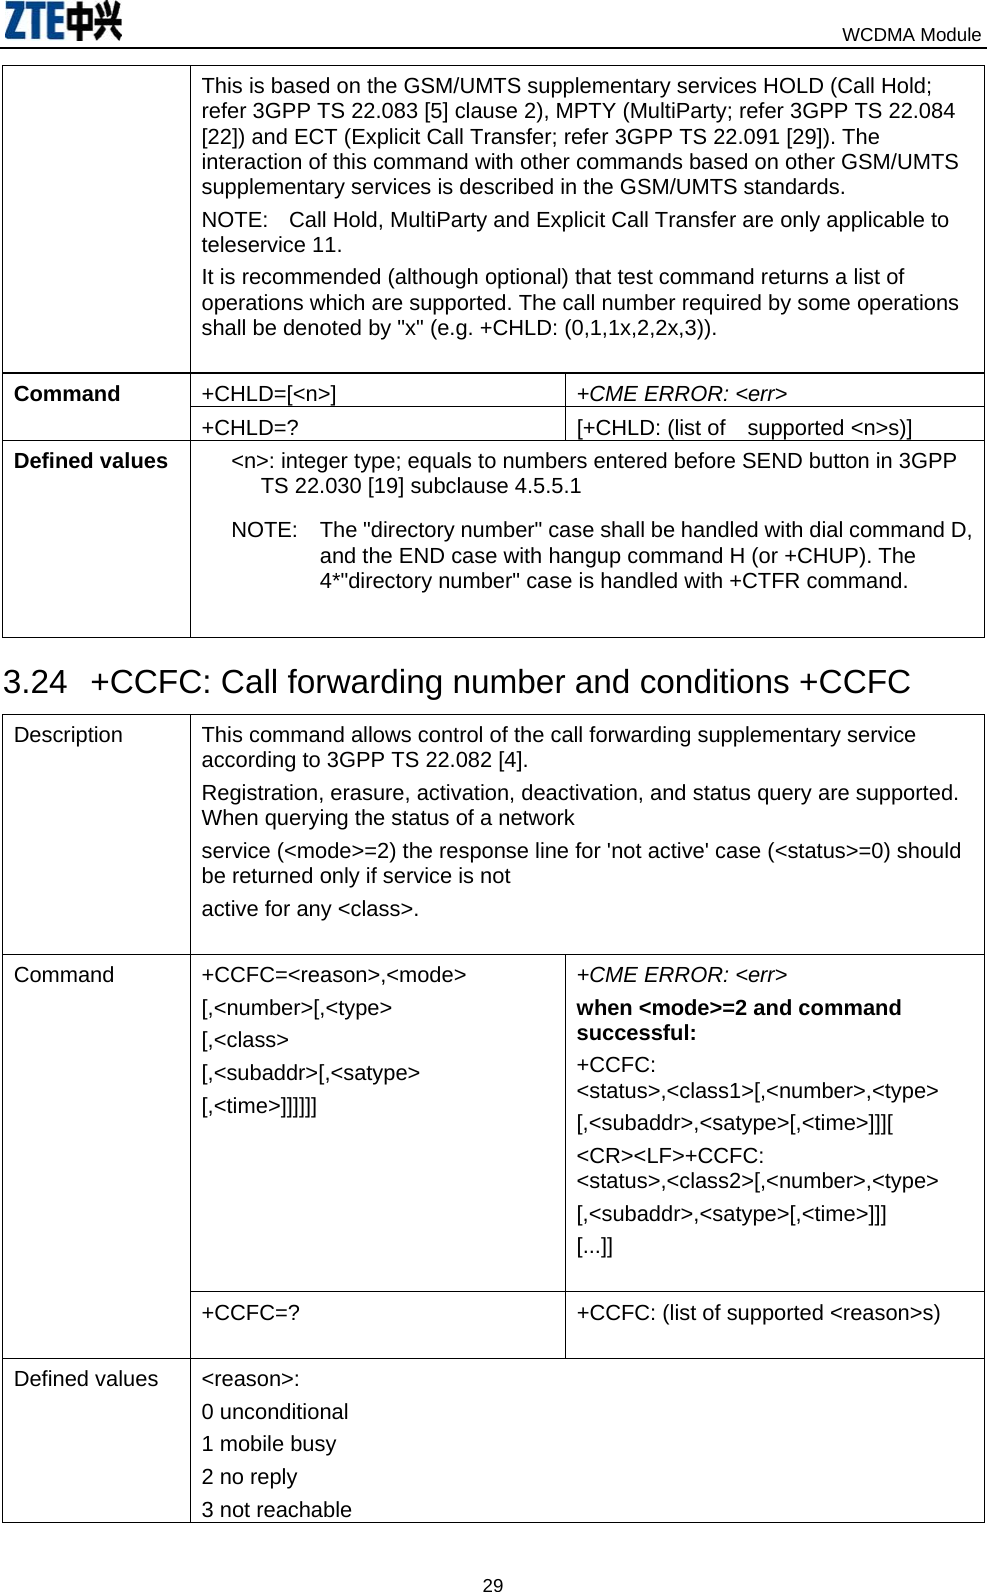                                                                            WCDMA Module  29This is based on the GSM/UMTS supplementary services HOLD (Call Hold; refer 3GPP TS 22.083 [5] clause 2), MPTY (MultiParty; refer 3GPP TS 22.084 [22]) and ECT (Explicit Call Transfer; refer 3GPP TS 22.091 [29]). The interaction of this command with other commands based on other GSM/UMTS supplementary services is described in the GSM/UMTS standards. NOTE:  Call Hold, MultiParty and Explicit Call Transfer are only applicable to teleservice 11. It is recommended (although optional) that test command returns a list of operations which are supported. The call number required by some operations shall be denoted by &quot;x&quot; (e.g. +CHLD: (0,1,1x,2,2x,3)).  +CHLD=[&lt;n&gt;]  +CME ERROR: &lt;err&gt; Command  +CHLD=?  [+CHLD: (list of supported &lt;n&gt;s)] Defined values  &lt;n&gt;: integer type; equals to numbers entered before SEND button in 3GPP TS 22.030 [19] subclause 4.5.5.1 NOTE:  The &quot;directory number&quot; case shall be handled with dial command D, and the END case with hangup command H (or +CHUP). The 4*&quot;directory number&quot; case is handled with +CTFR command.  3.24  +CCFC: Call forwarding number and conditions +CCFC Description  This command allows control of the call forwarding supplementary service according to 3GPP TS 22.082 [4]. Registration, erasure, activation, deactivation, and status query are supported. When querying the status of a network service (&lt;mode&gt;=2) the response line for &apos;not active&apos; case (&lt;status&gt;=0) should be returned only if service is not active for any &lt;class&gt;.  +CCFC=&lt;reason&gt;,&lt;mode&gt; [,&lt;number&gt;[,&lt;type&gt; [,&lt;class&gt; [,&lt;subaddr&gt;[,&lt;satype&gt; [,&lt;time&gt;]]]]]]  +CME ERROR: &lt;err&gt; when &lt;mode&gt;=2 and command successful: +CCFC: &lt;status&gt;,&lt;class1&gt;[,&lt;number&gt;,&lt;type&gt; [,&lt;subaddr&gt;,&lt;satype&gt;[,&lt;time&gt;]]][ &lt;CR&gt;&lt;LF&gt;+CCFC: &lt;status&gt;,&lt;class2&gt;[,&lt;number&gt;,&lt;type&gt; [,&lt;subaddr&gt;,&lt;satype&gt;[,&lt;time&gt;]]] [...]]  Command  +CCFC=?  +CCFC: (list of supported &lt;reason&gt;s)  Defined values  &lt;reason&gt;: 0 unconditional 1 mobile busy 2 no reply 3 not reachable 